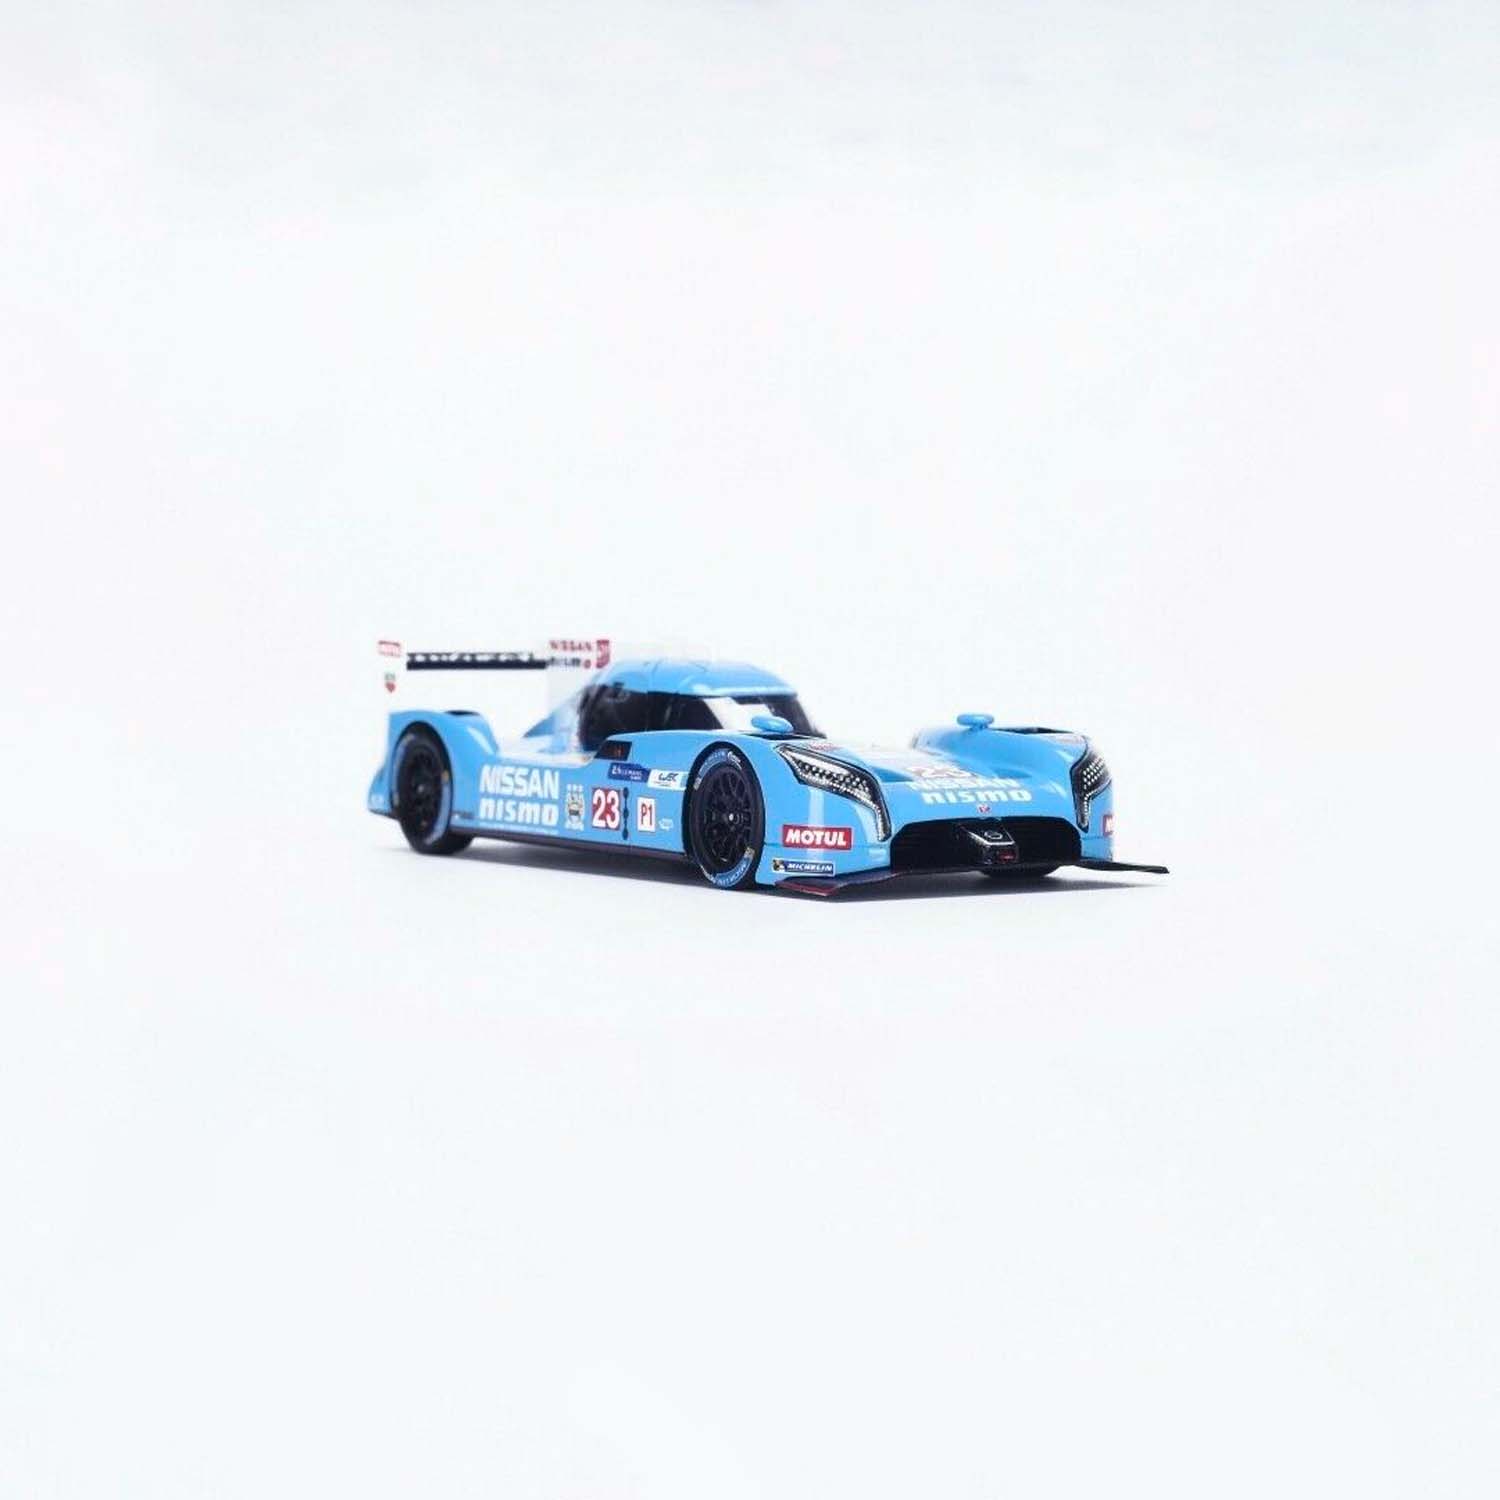 Nissan GT-R LM Nismo #23 Manchester City FC 2015 | 1:43 Scale Model-1:43 Scale Model-Spark Models-gpx-store